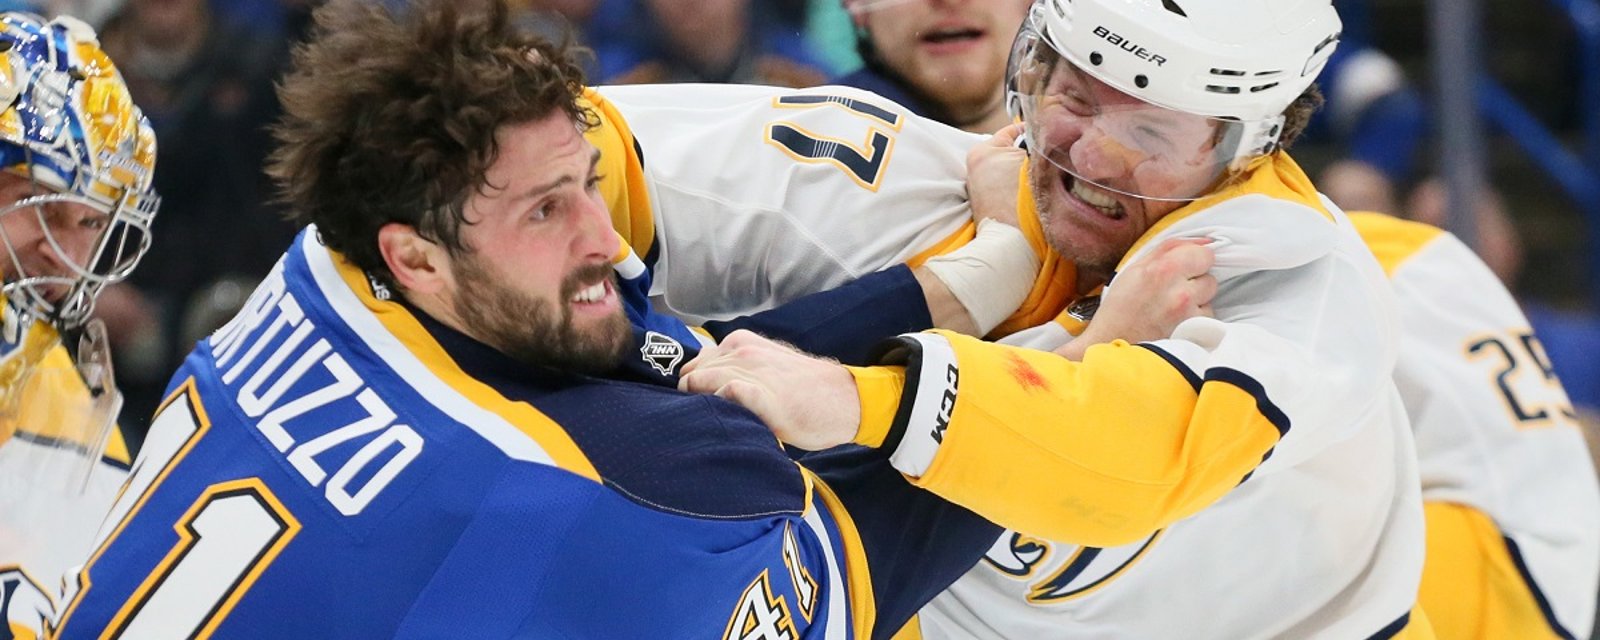 NHL enforcer gets 3 year deal just days after attacking teammate in practice.